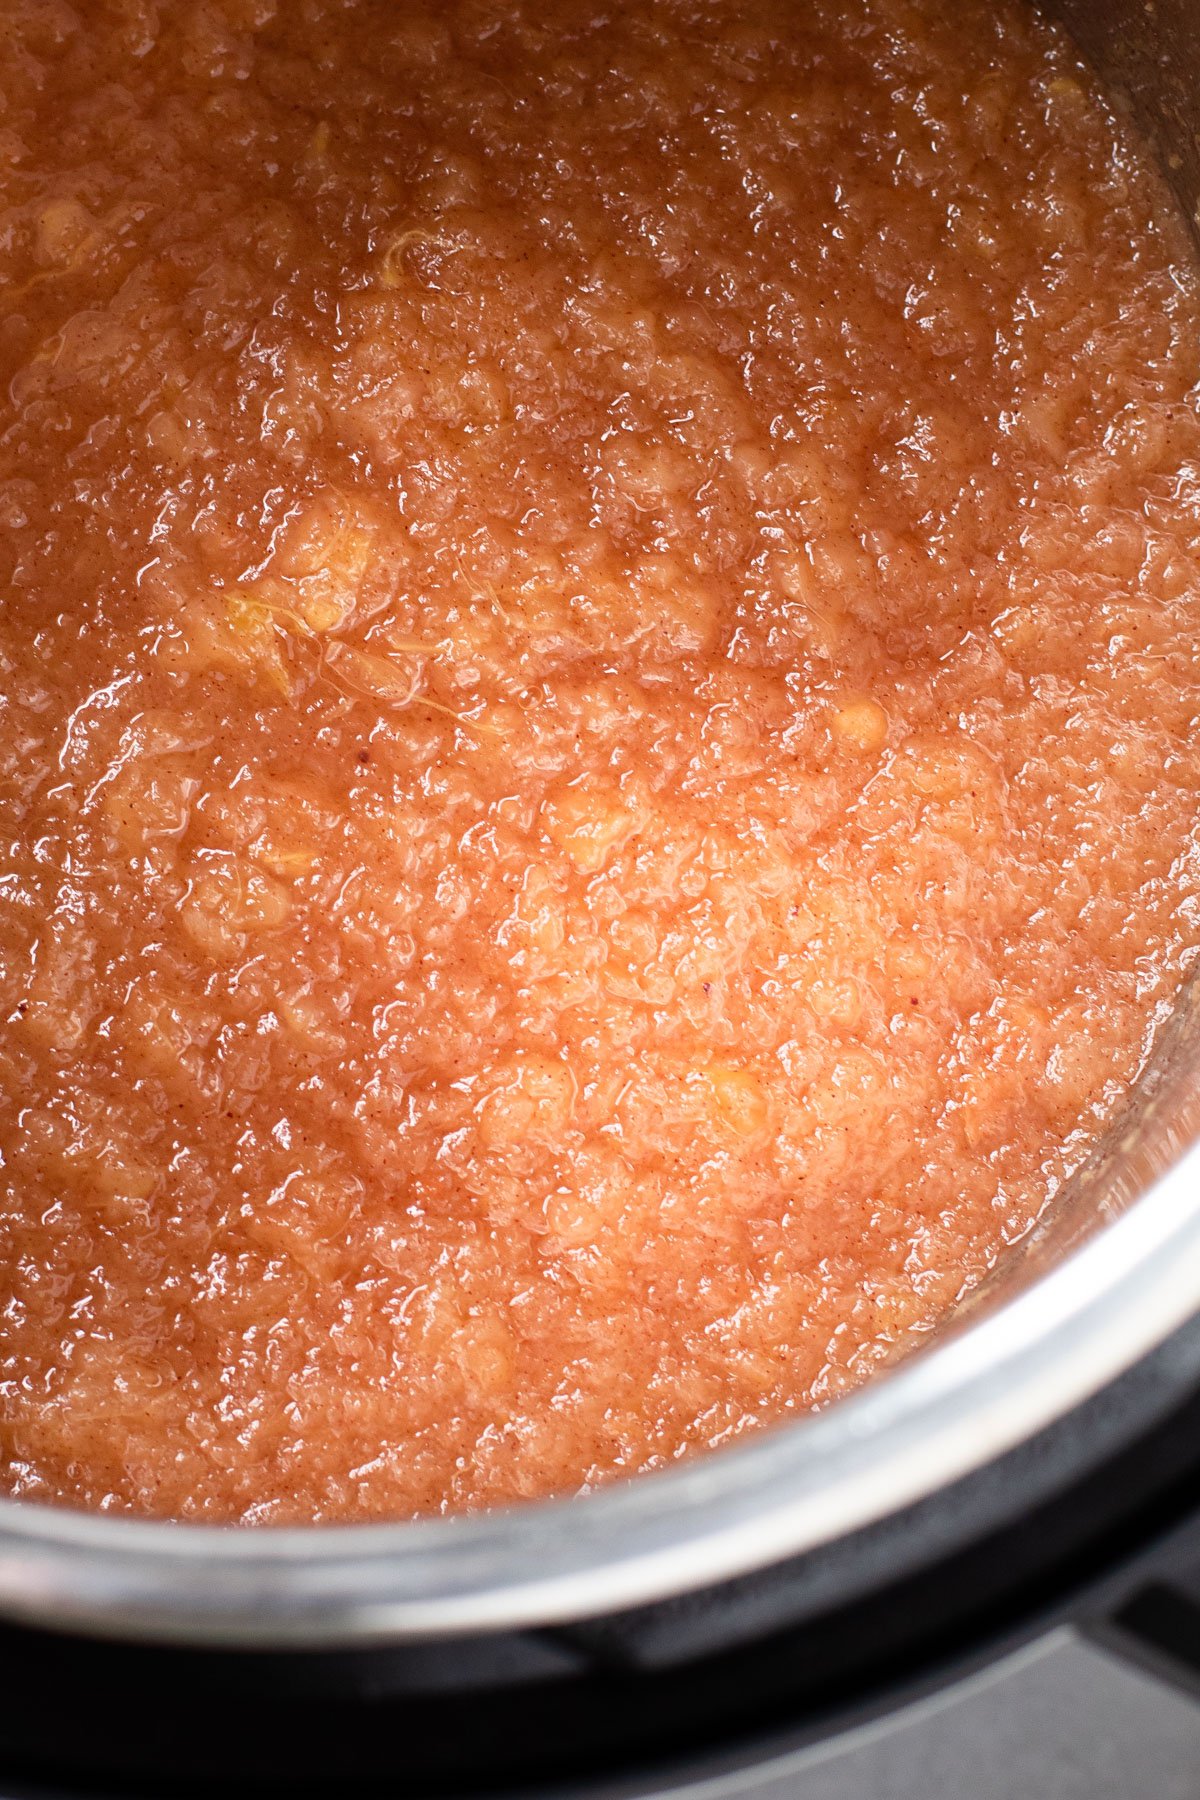 Apple sauce made in an instant pot.